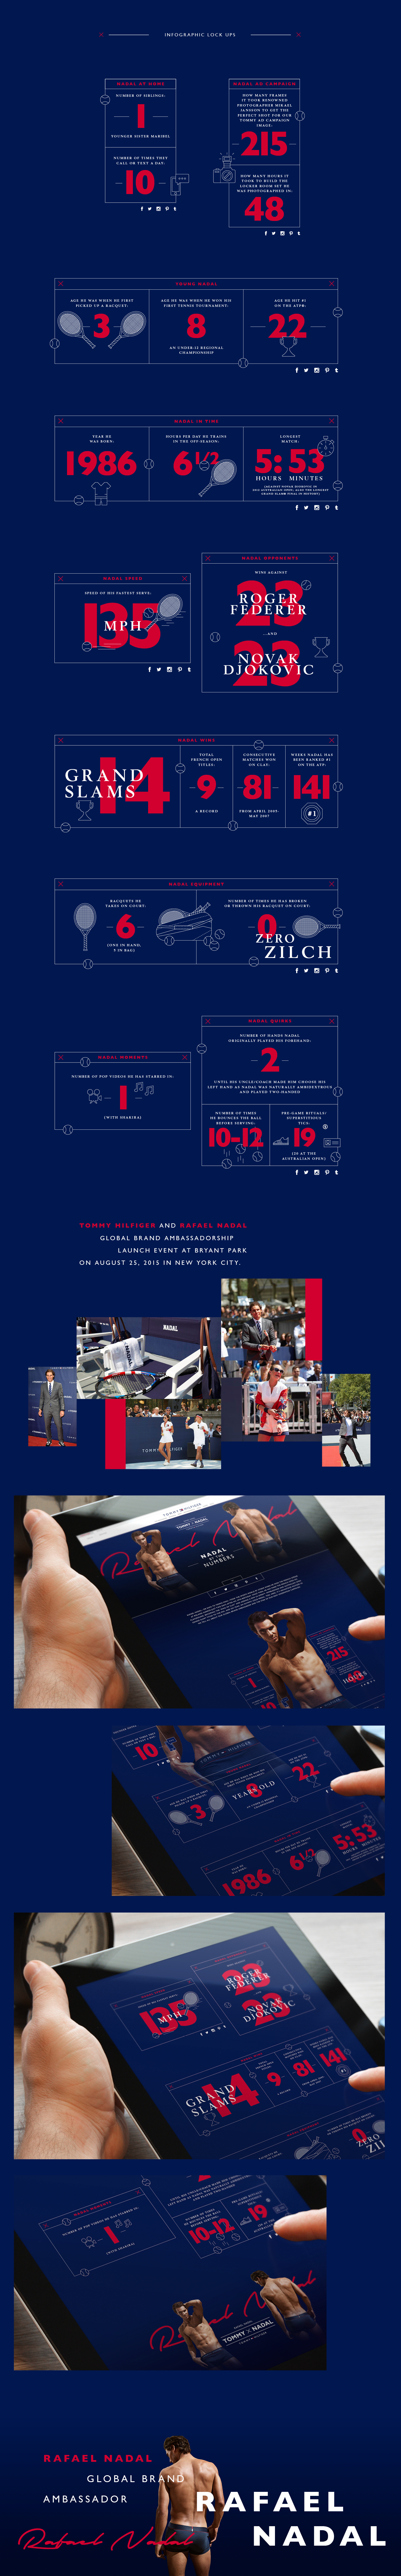 infographic info graphic tommy tennis Nadal stats Clothing tommy hilfiger hilfiger rafael nadal